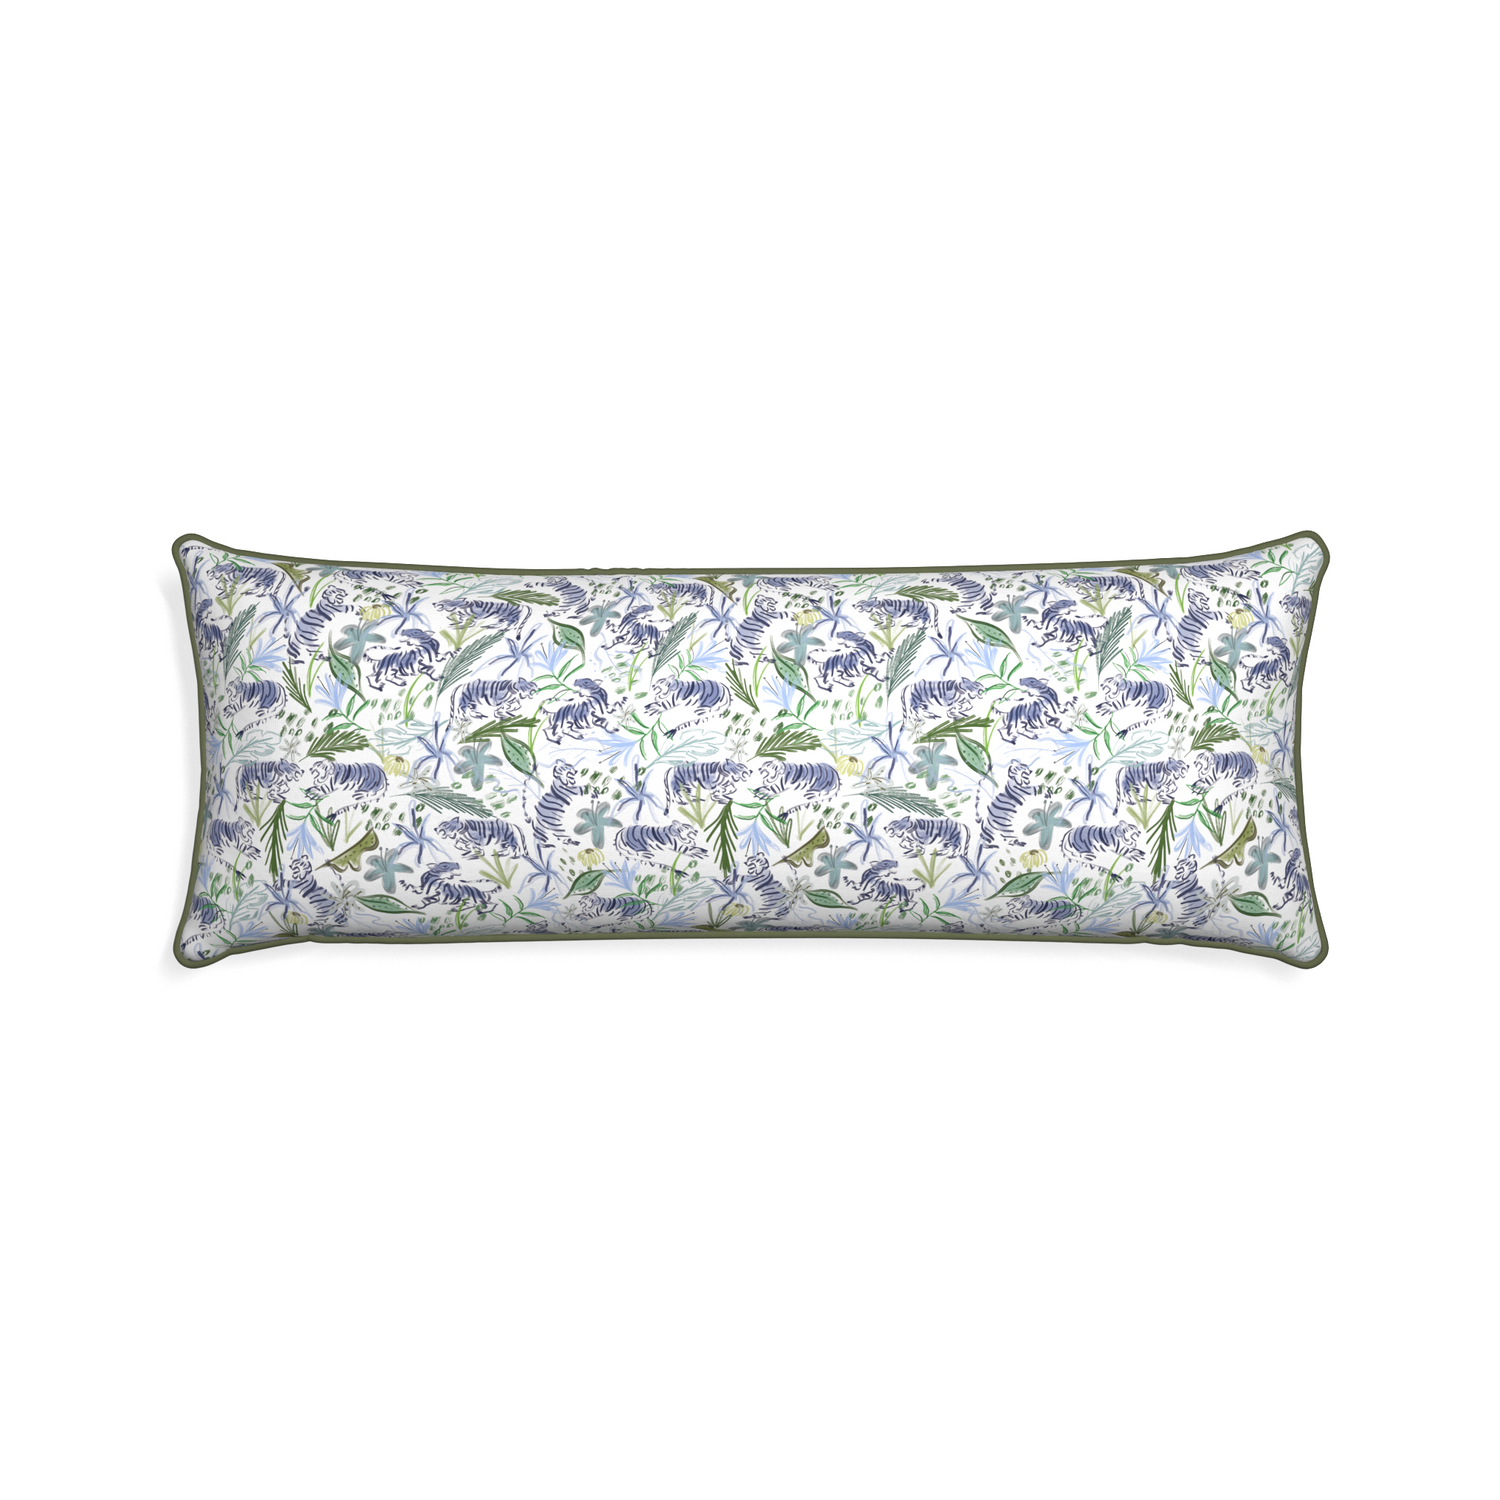 Xl-lumbar frida green custom pillow with f piping on white background